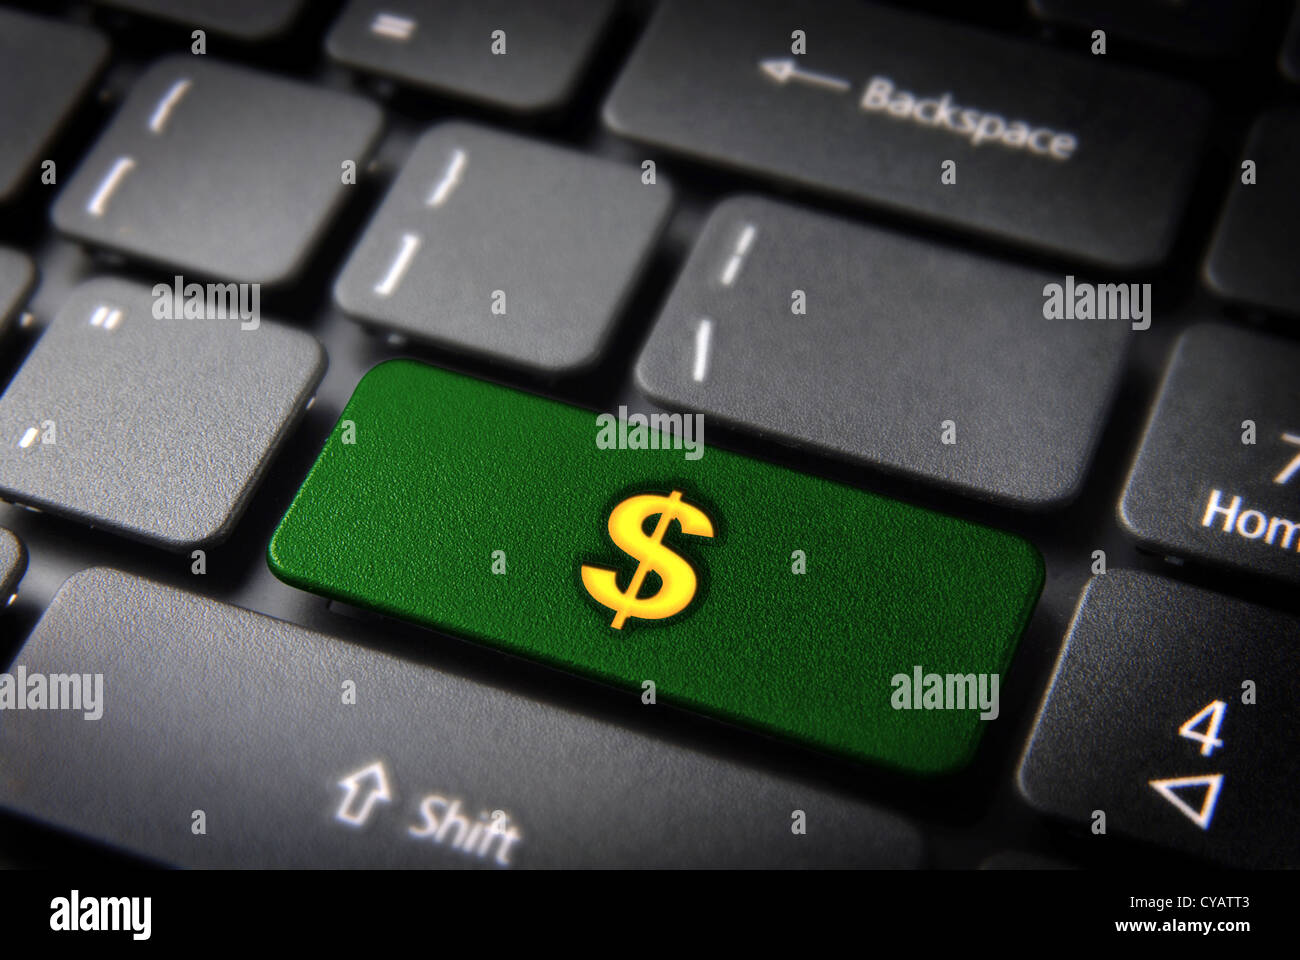 Make money with internet: green key with dollar  icon on laptop keyboard. Included clipping path, so you can easily edit it Stock Photo